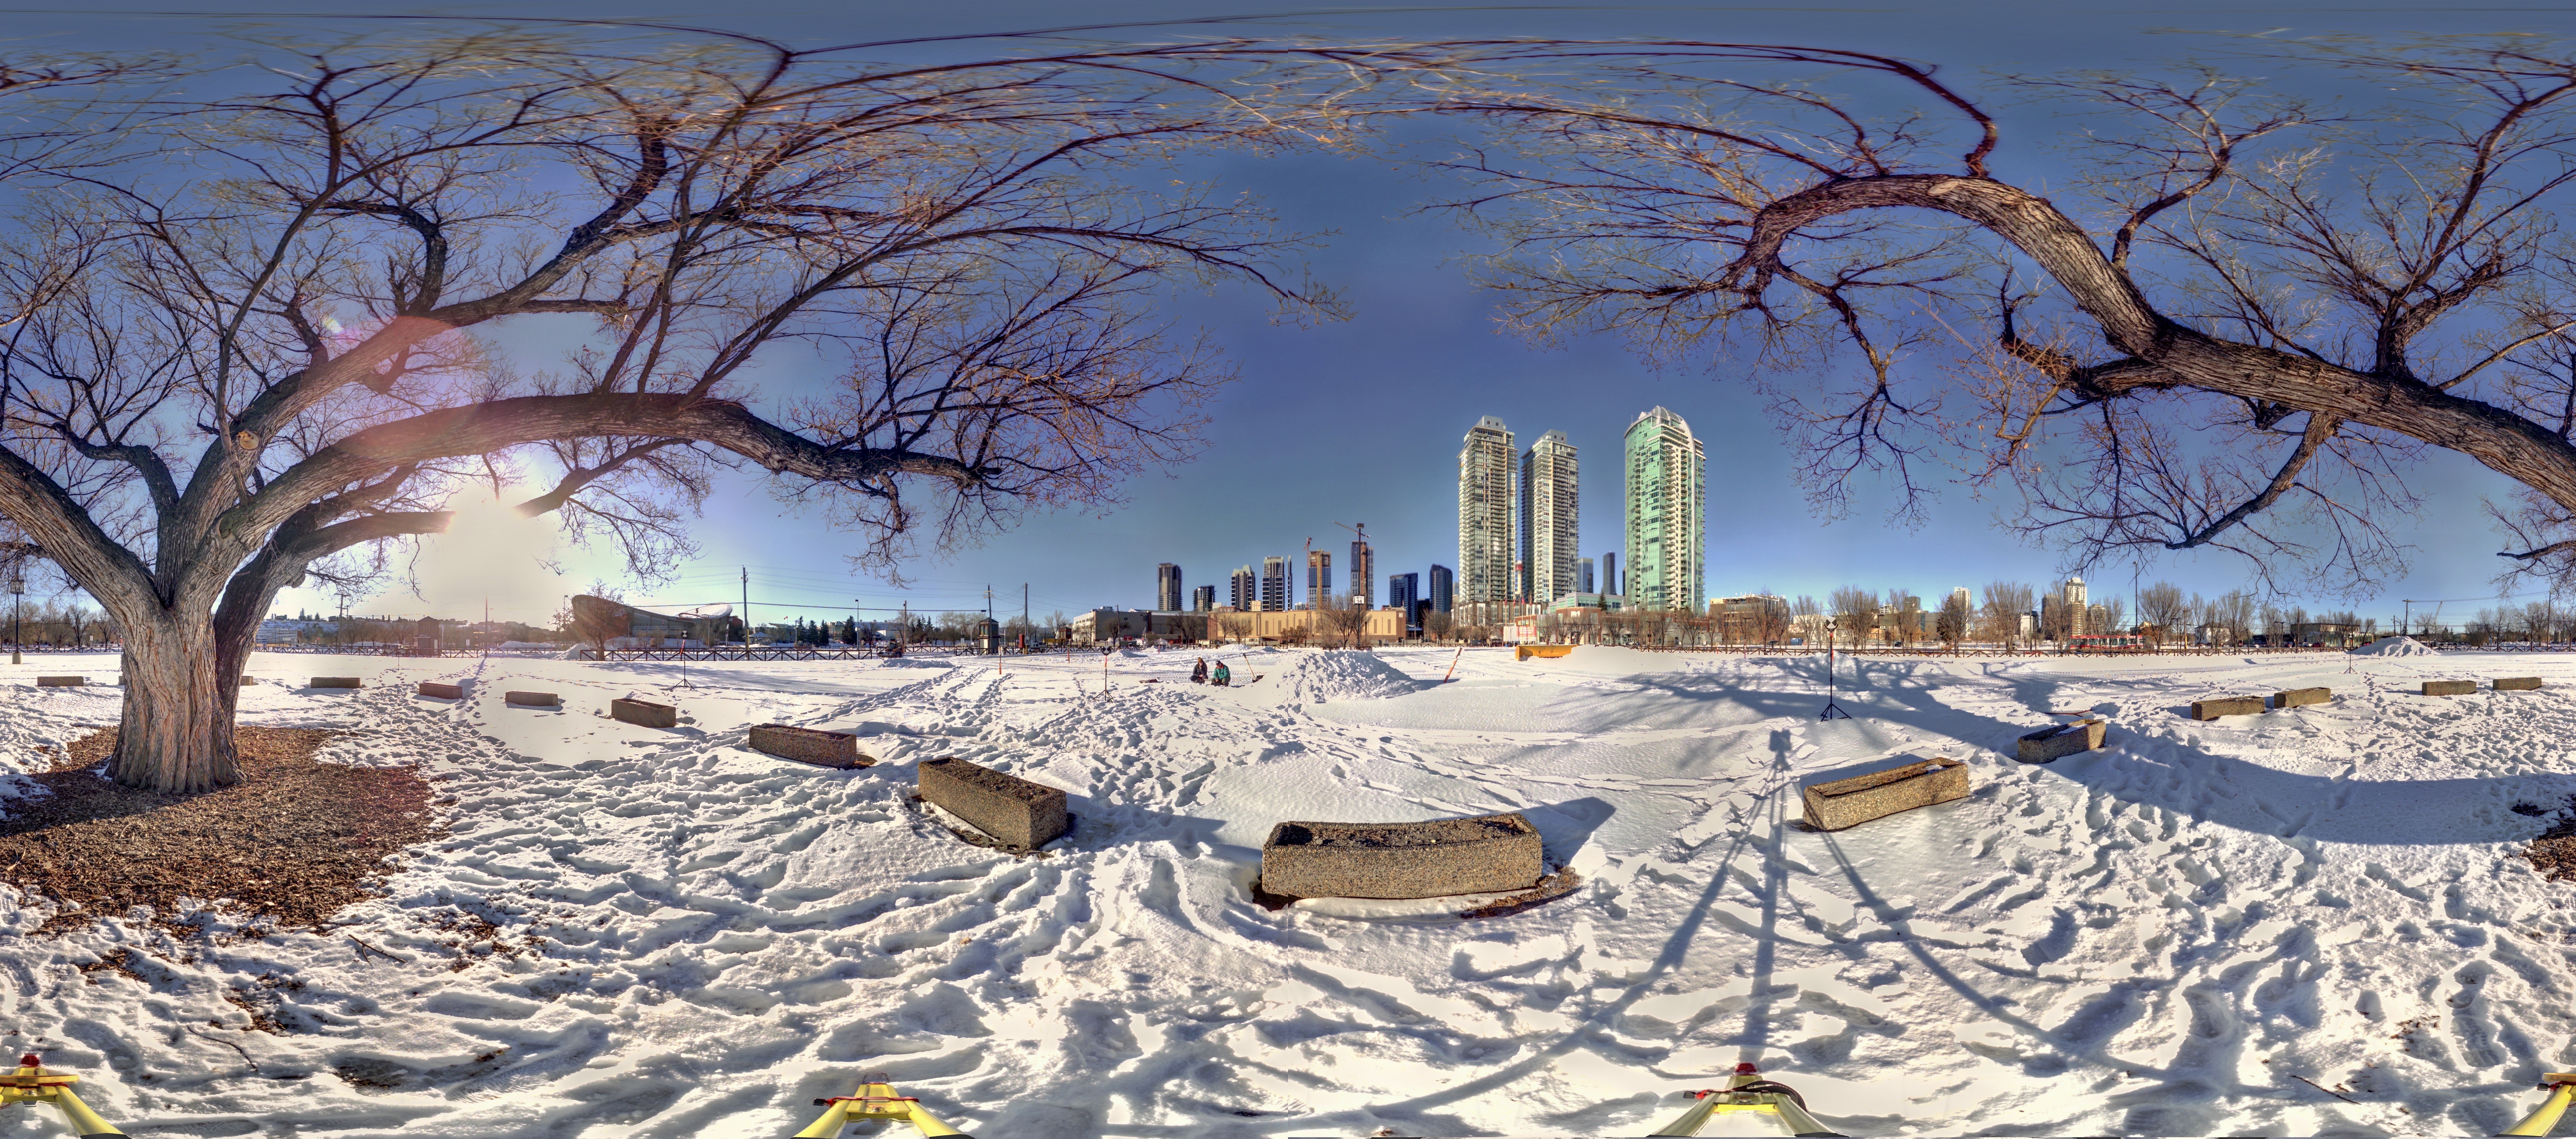 Panoramic view of the Stampede Elm and downtown Calgary from Z+F 5010X laser scanner, scanning location 3